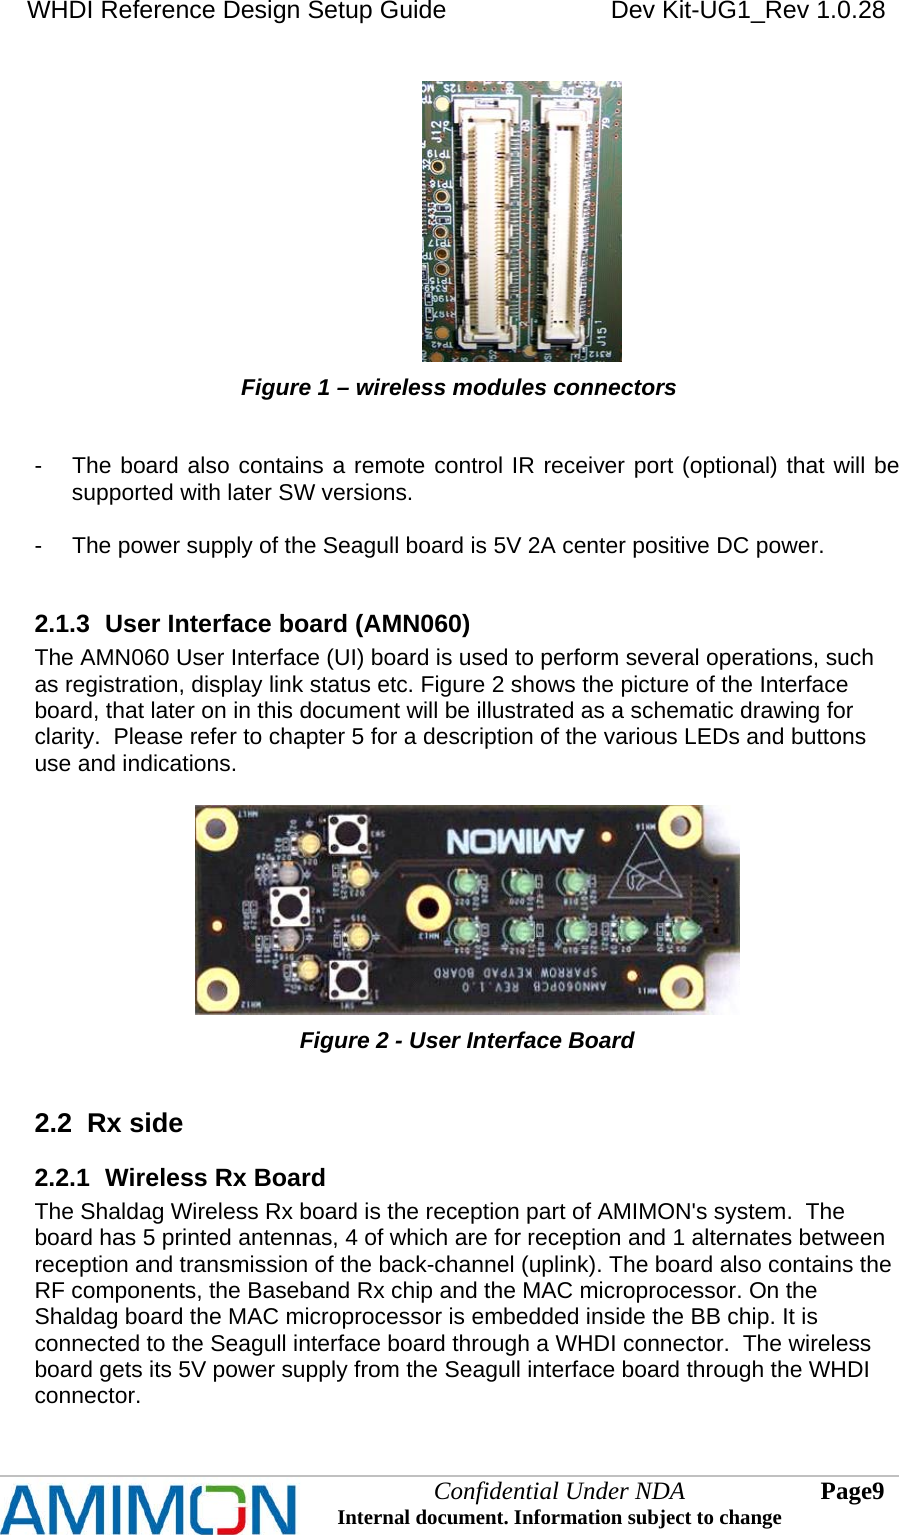 WHDI Reference Design Setup Guide   Dev Kit-UG1_Rev 1.0.28                                                                  Figure 1 – wireless modules connectors   -  The board also contains a remote control IR receiver port (optional) that will be supported with later SW versions.  -  The power supply of the Seagull board is 5V 2A center positive DC power.  2.1.3  User Interface board (AMN060) The AMN060 User Interface (UI) board is used to perform several operations, such as registration, display link status etc. Figure 2 shows the picture of the Interface board, that later on in this document will be illustrated as a schematic drawing for clarity.  Please refer to chapter 5 for a description of the various LEDs and buttons use and indications.    Figure 2 - User Interface Board  2.2  Rx side 2.2.1  Wireless Rx Board The Shaldag Wireless Rx board is the reception part of AMIMON&apos;s system.  The board has 5 printed antennas, 4 of which are for reception and 1 alternates between reception and transmission of the back-channel (uplink). The board also contains the RF components, the Baseband Rx chip and the MAC microprocessor. On the Shaldag board the MAC microprocessor is embedded inside the BB chip. It is connected to the Seagull interface board through a WHDI connector.  The wireless board gets its 5V power supply from the Seagull interface board through the WHDI connector.  Confidential Under NDA Internal document. Information subject to change  9 Page   